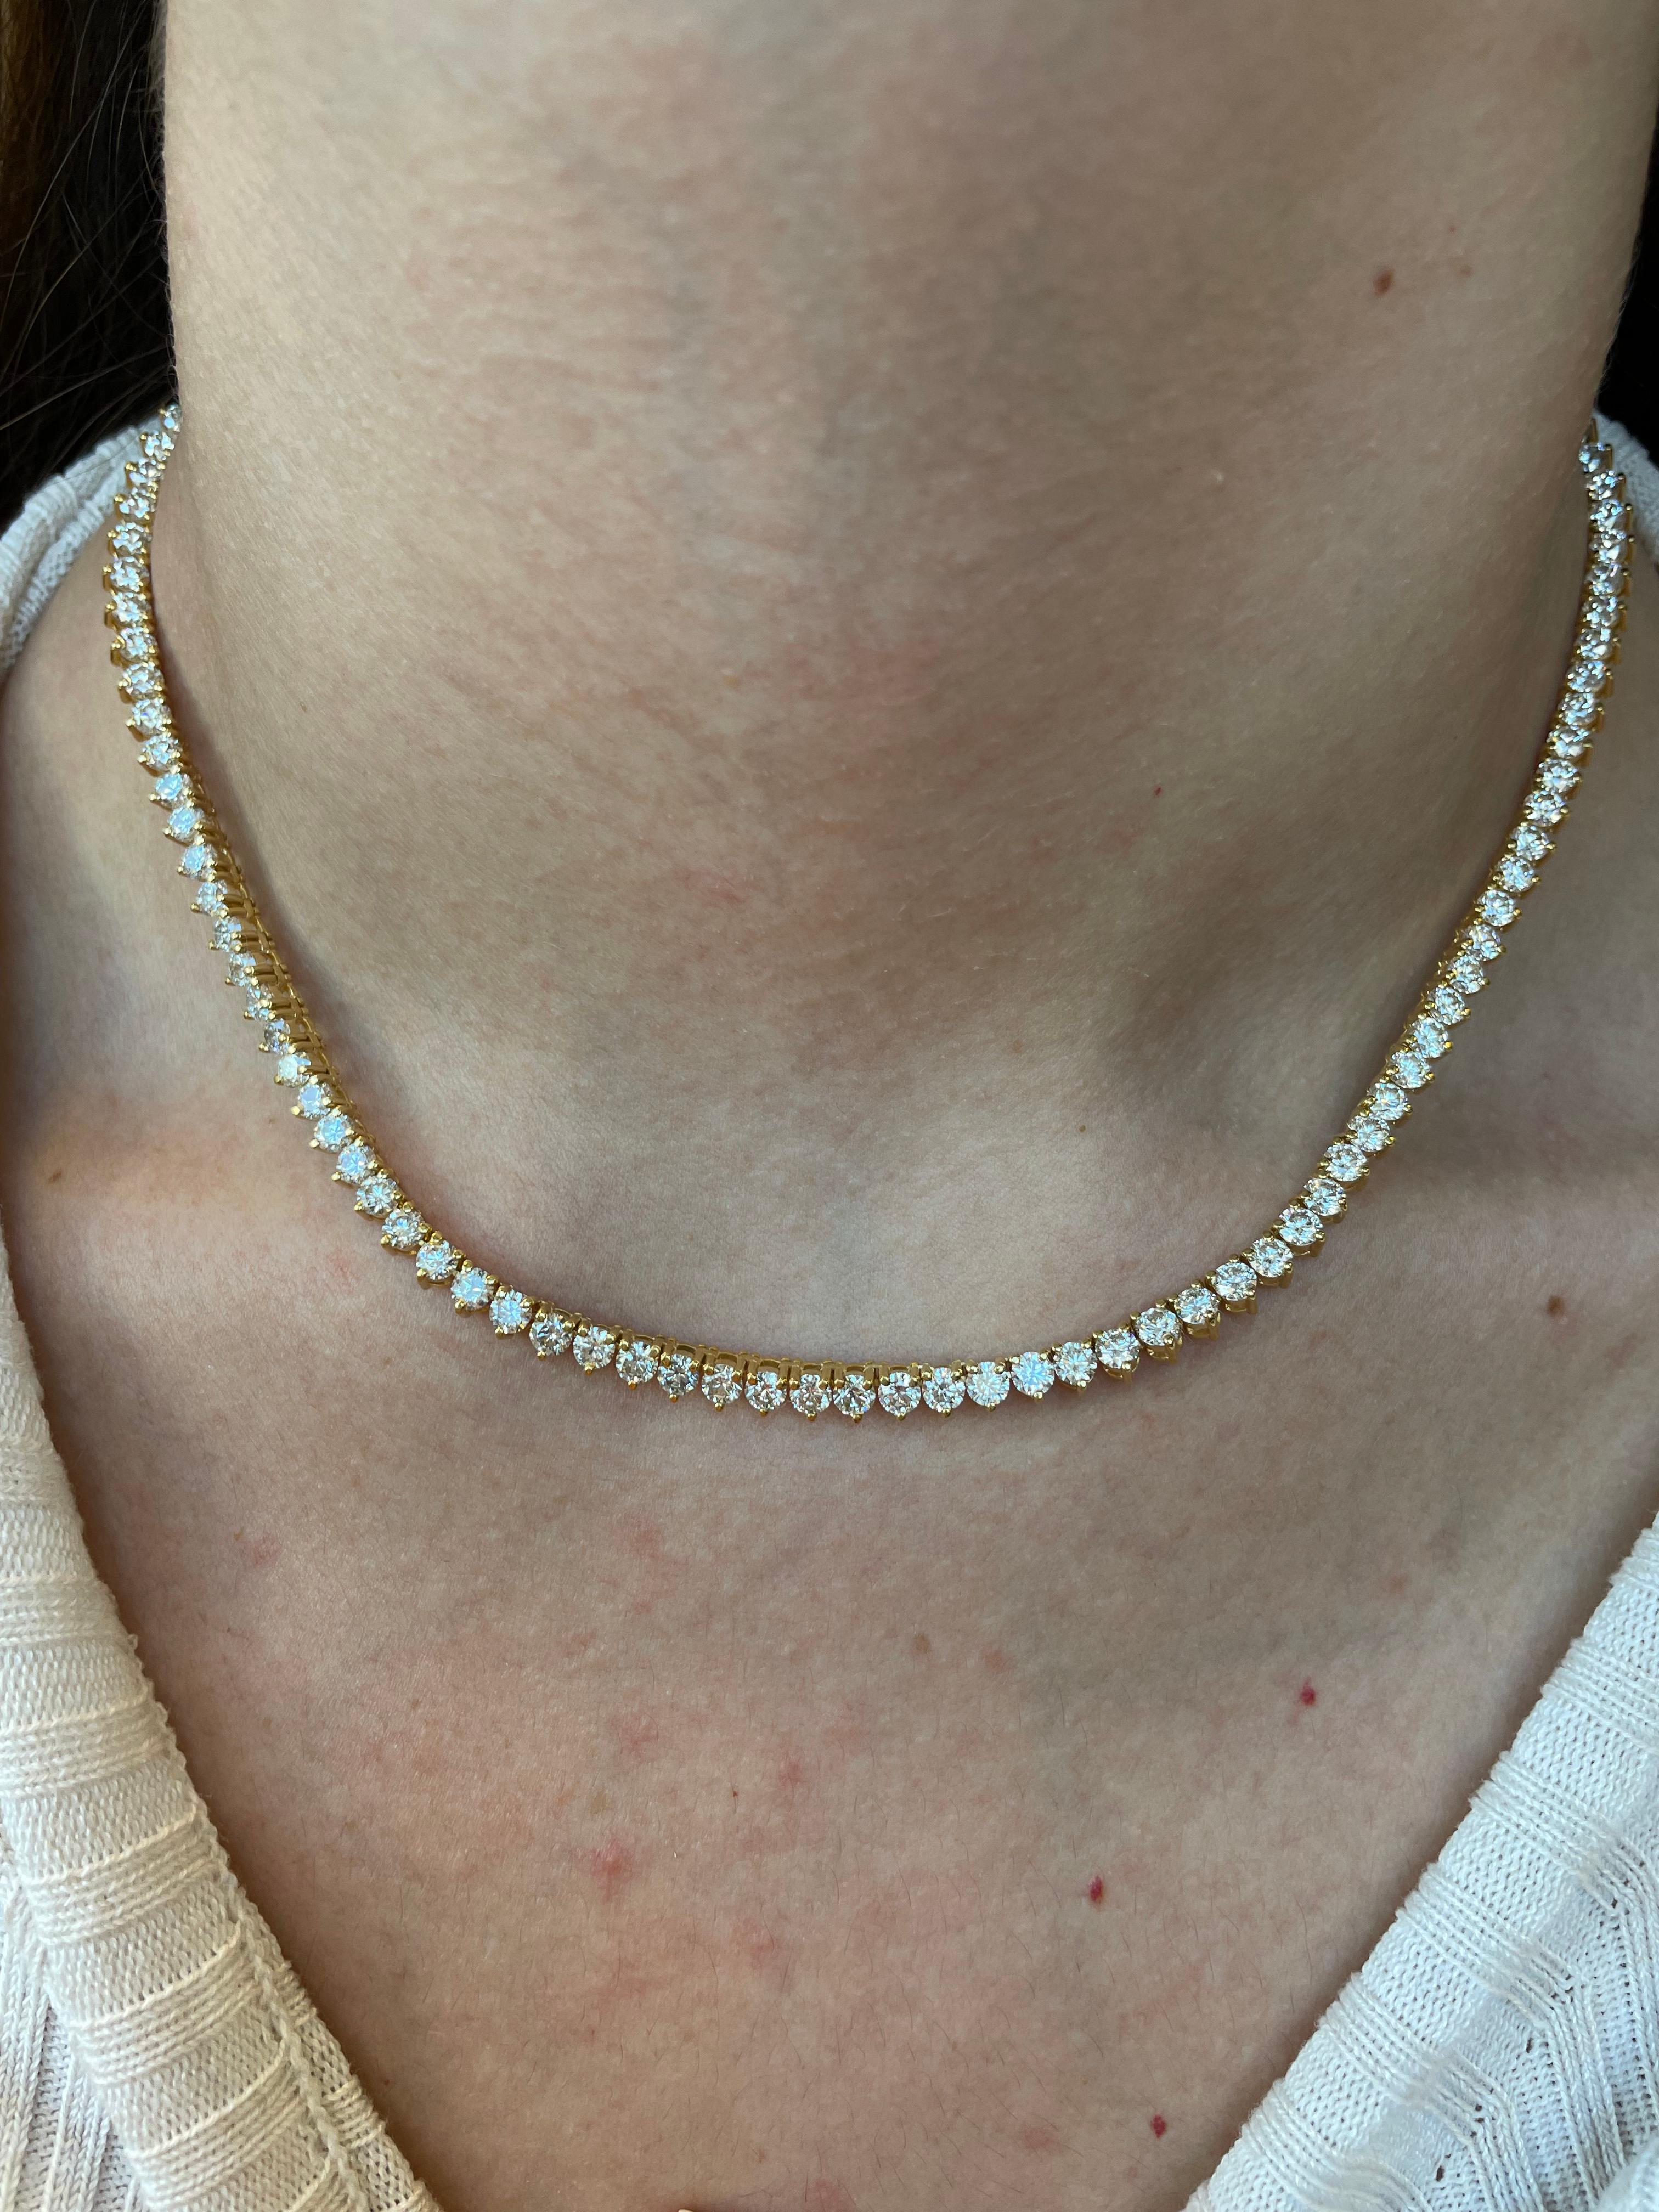 Beautiful and classic diamond tennis necklace, by Alexander Beverly Hills.
16.25 carats of round brilliant diamonds, approximately G/H color and VS2/SI1 clarity. 18k yellow gold, 29.63 grams, 16in.
Accommodated with an up-to-date appraisal by a GIA